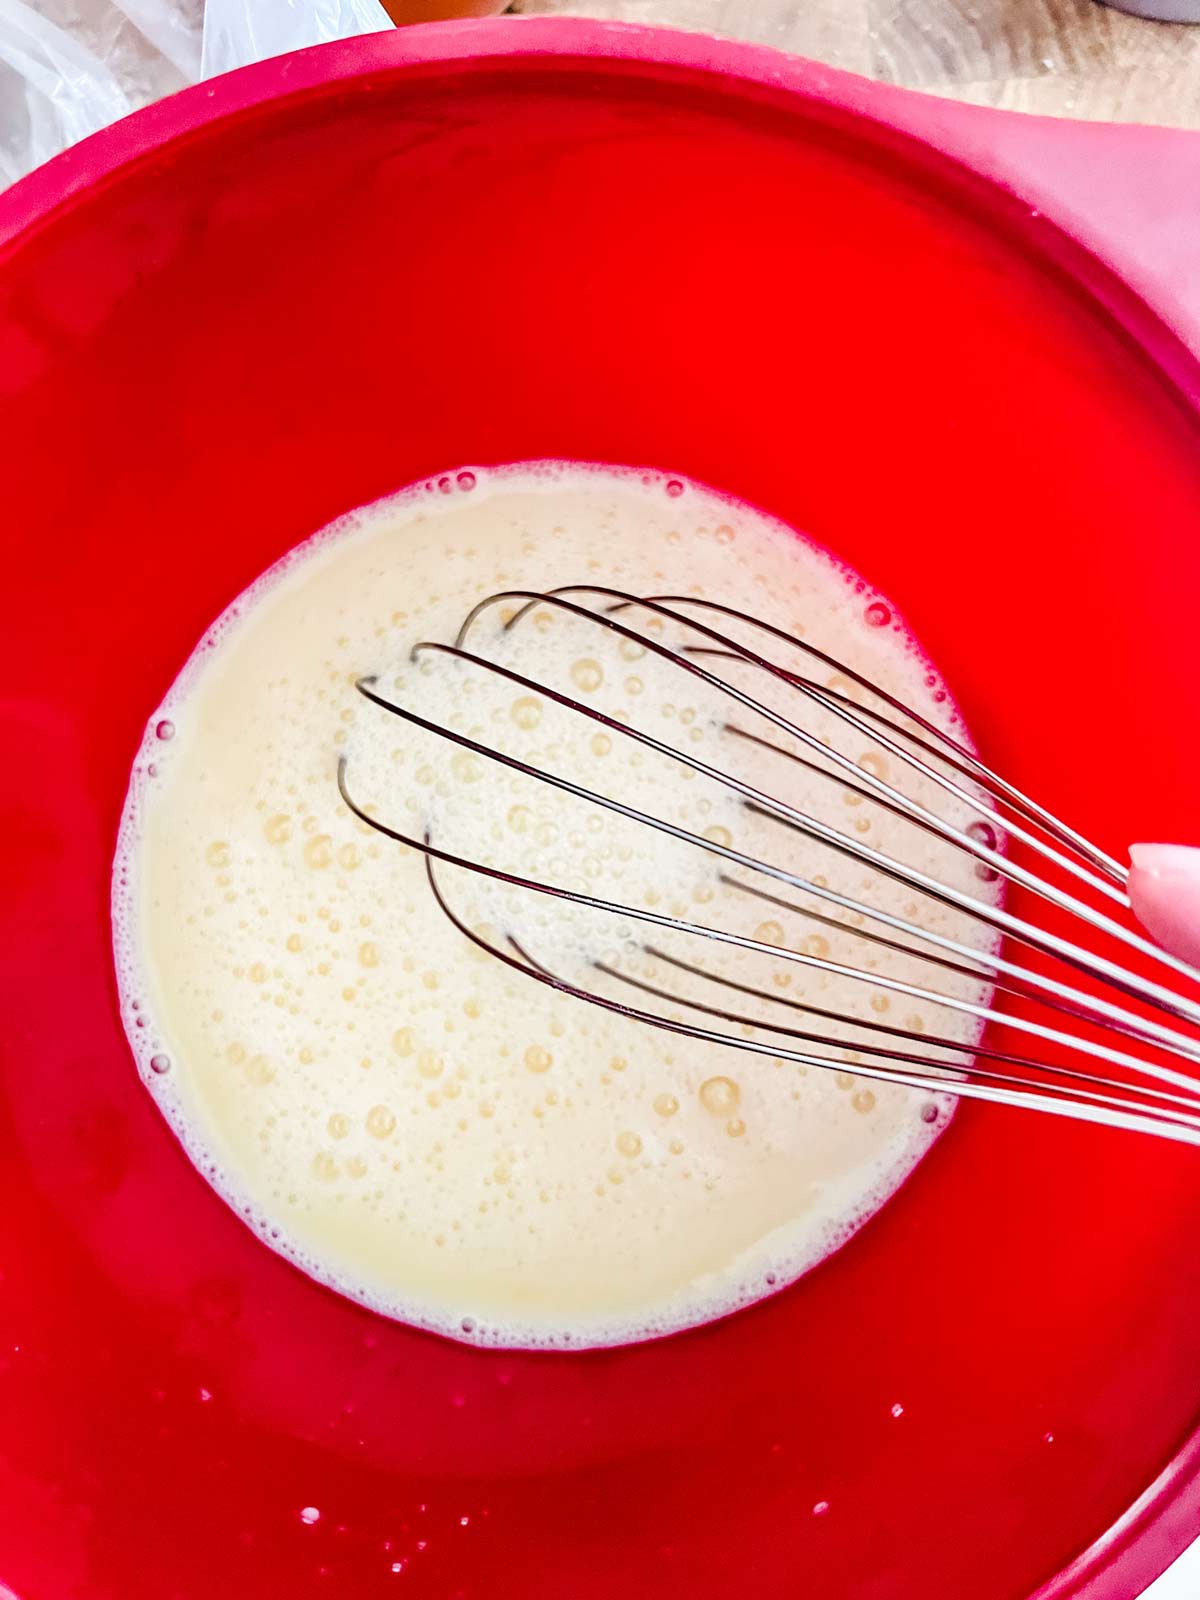 Eggs and a warm milk mixture being whisked together in a red bowl.